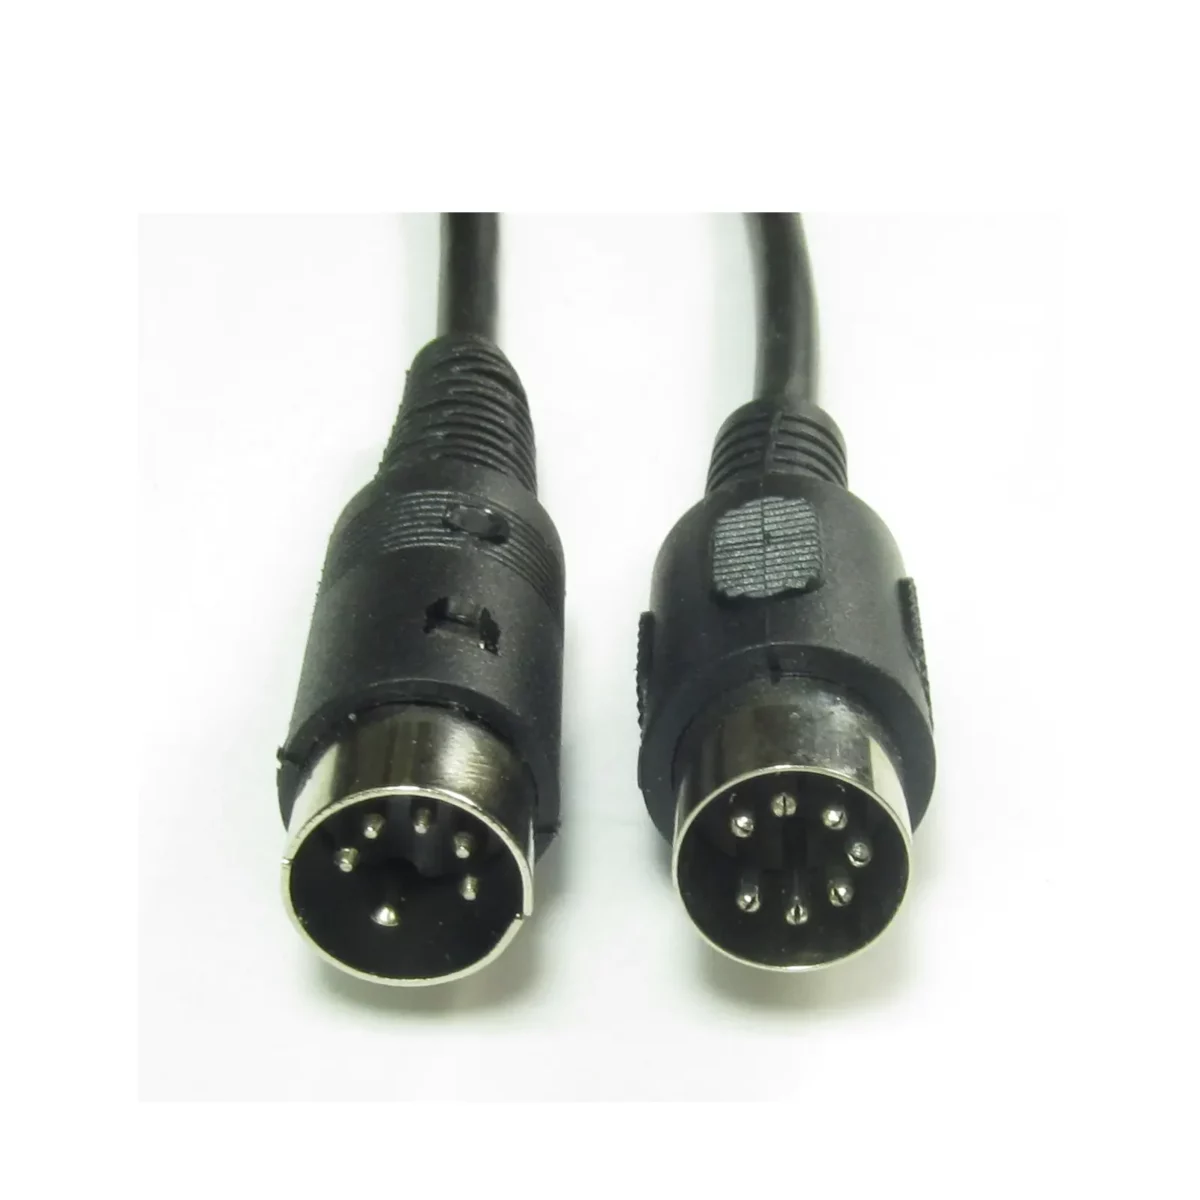 Ameritron ARB-704 Amplifier Keying Interface Cable PNP-7DI